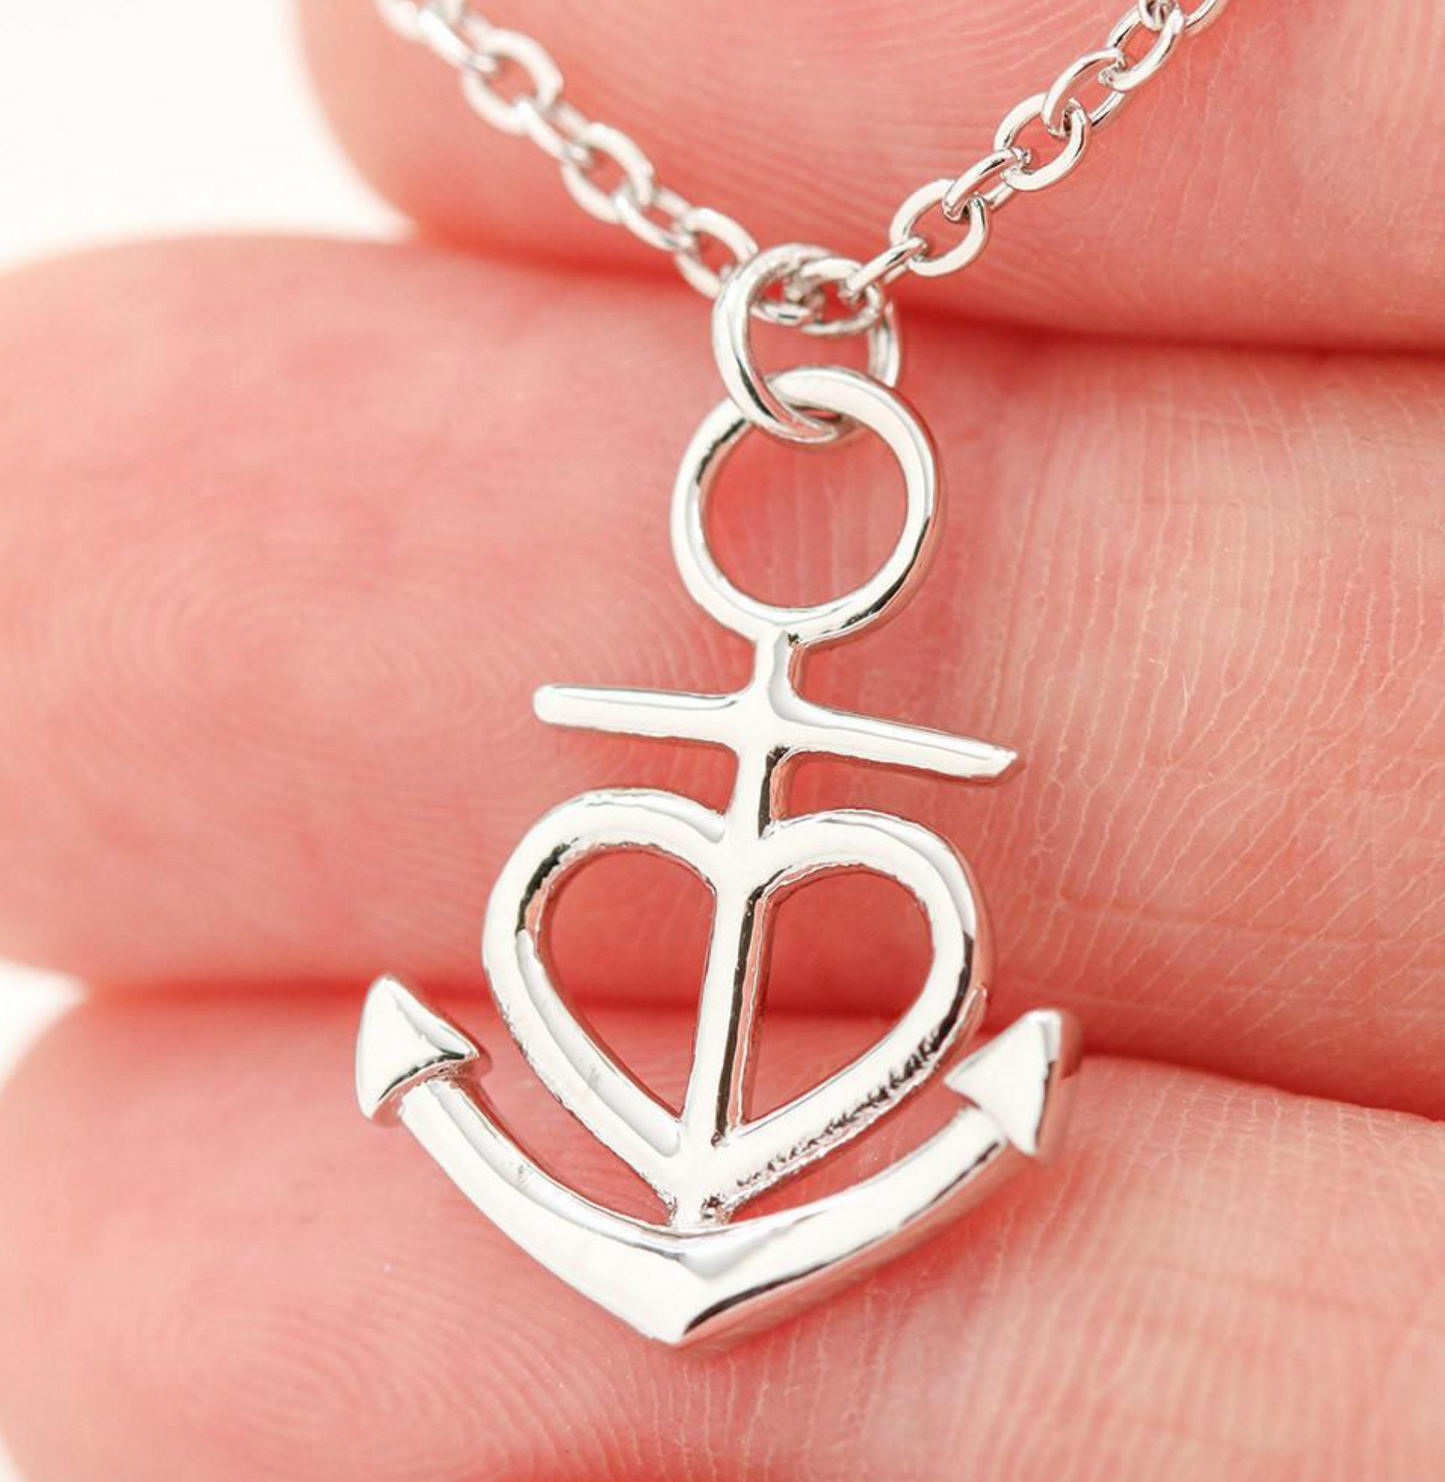 Graduate ANCHORED IN FAITH HOPE & LOVE Necklace Silver